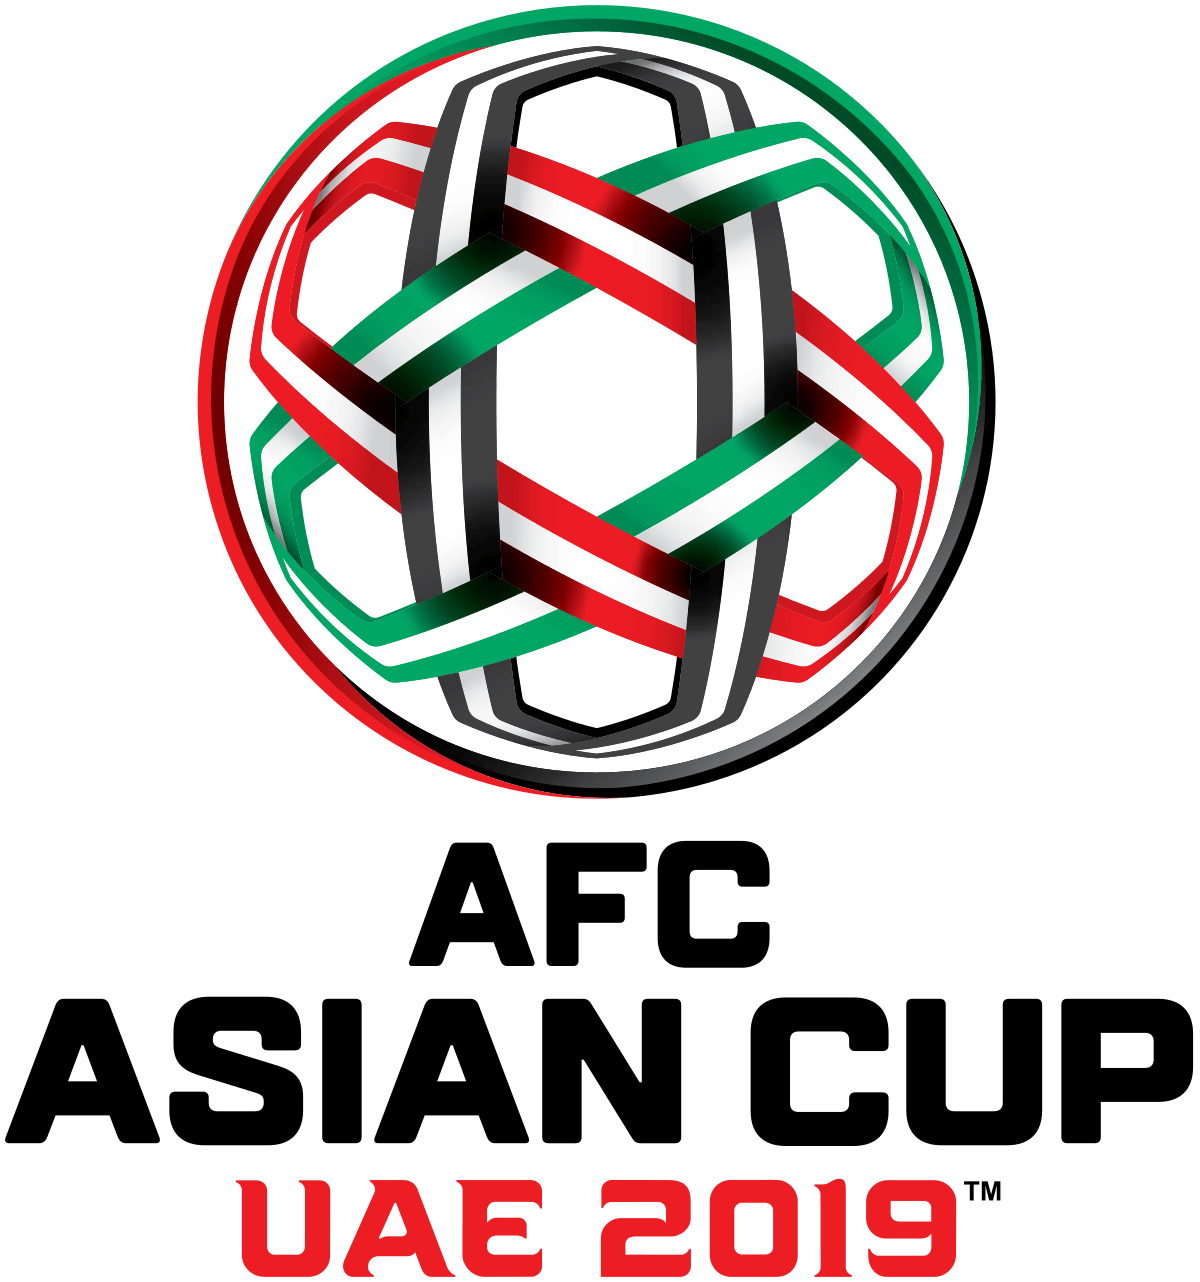 Red Asian S Logo - 2019 AFC Asian Cup